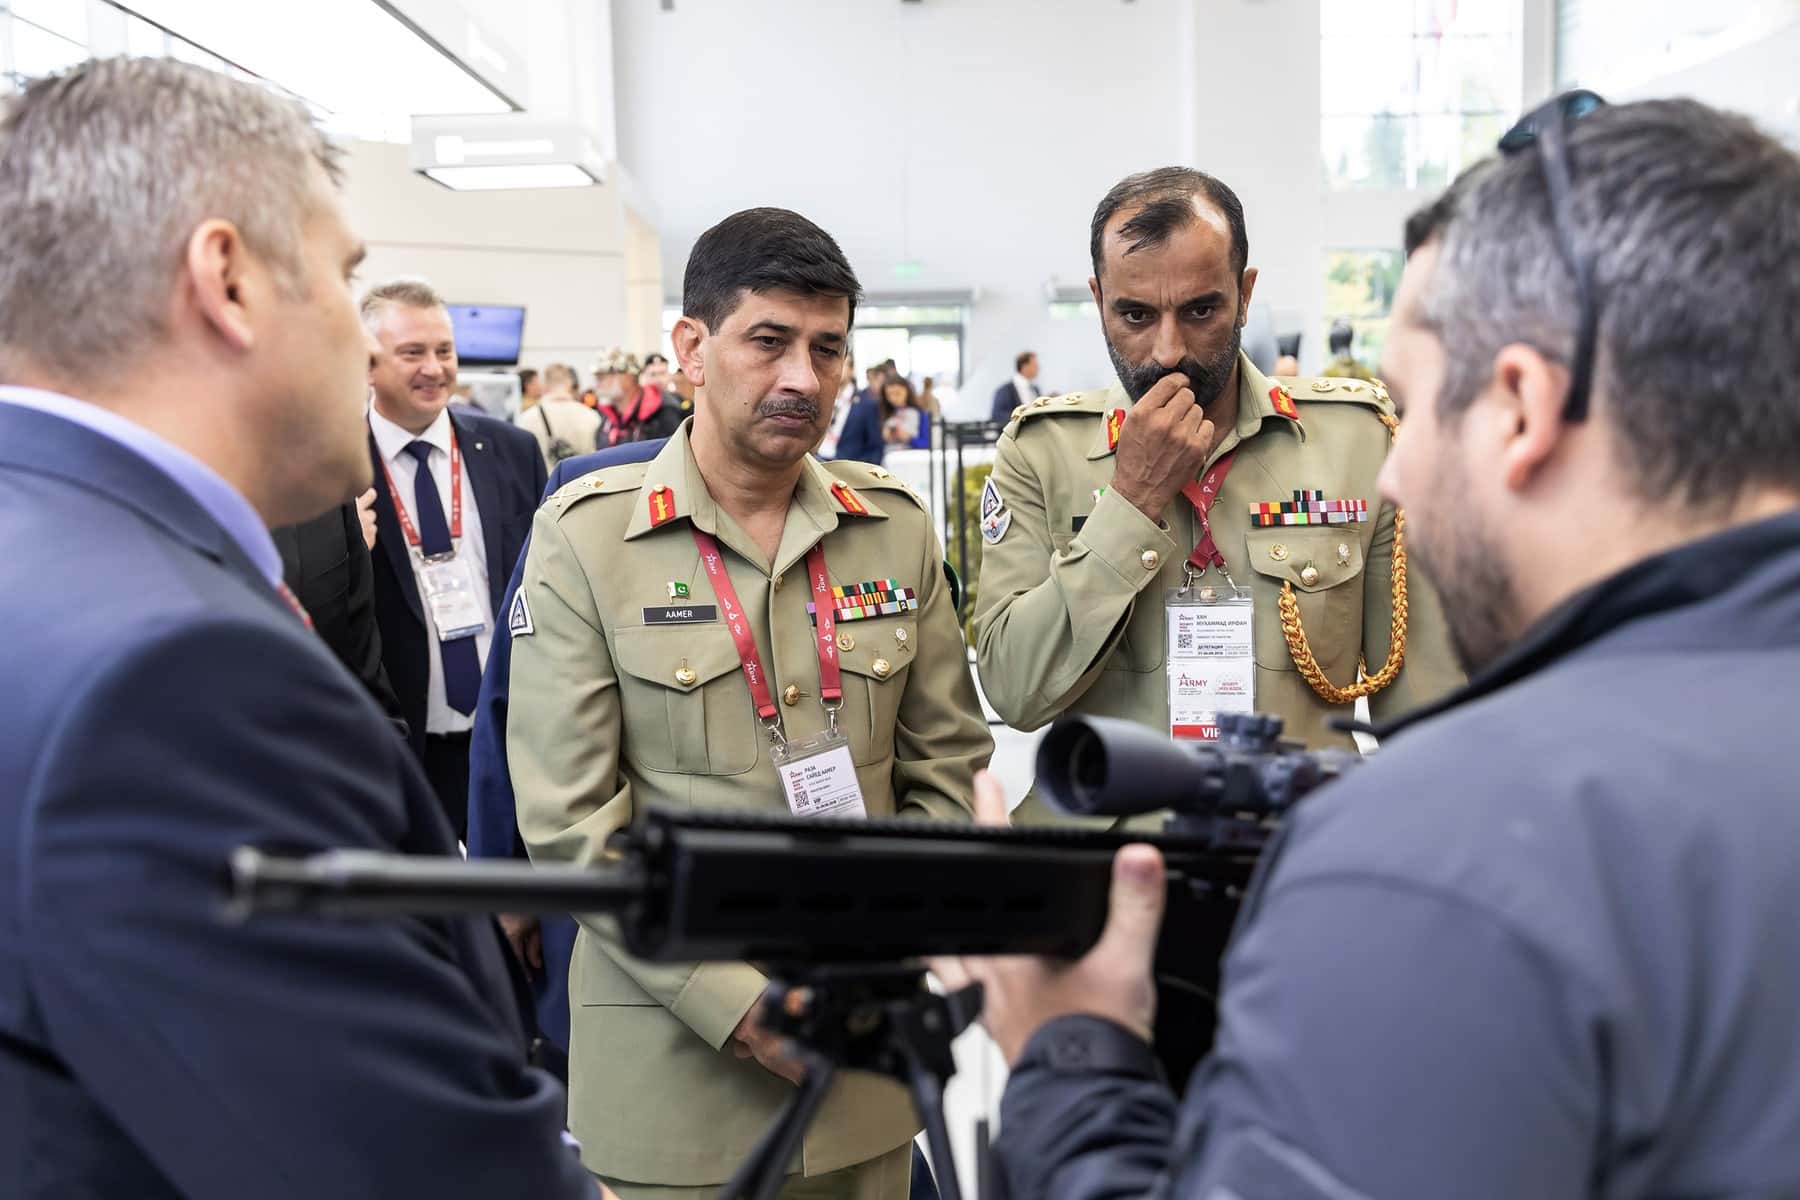 PA delegation in Army-2018 at Russian Stall.jpg